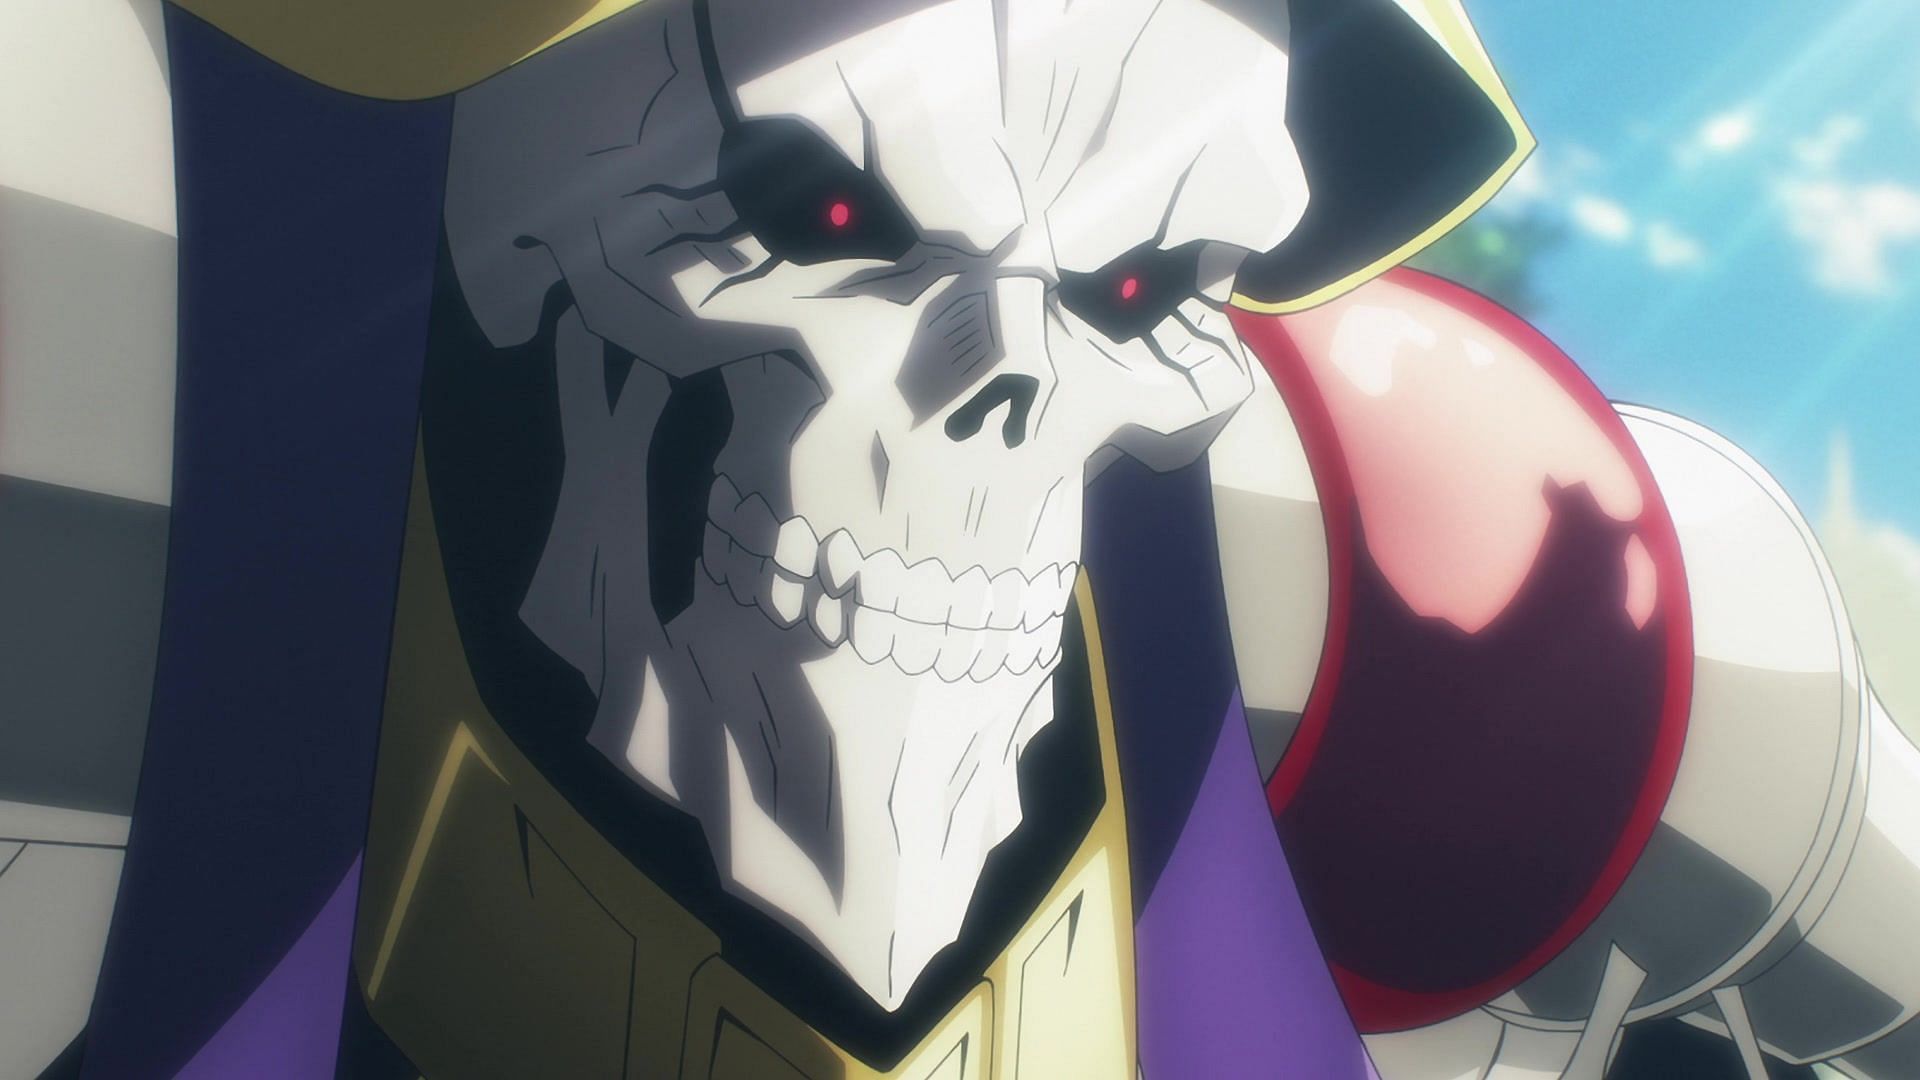 Ainz as seen in the show (Image via Studio Madhouse)